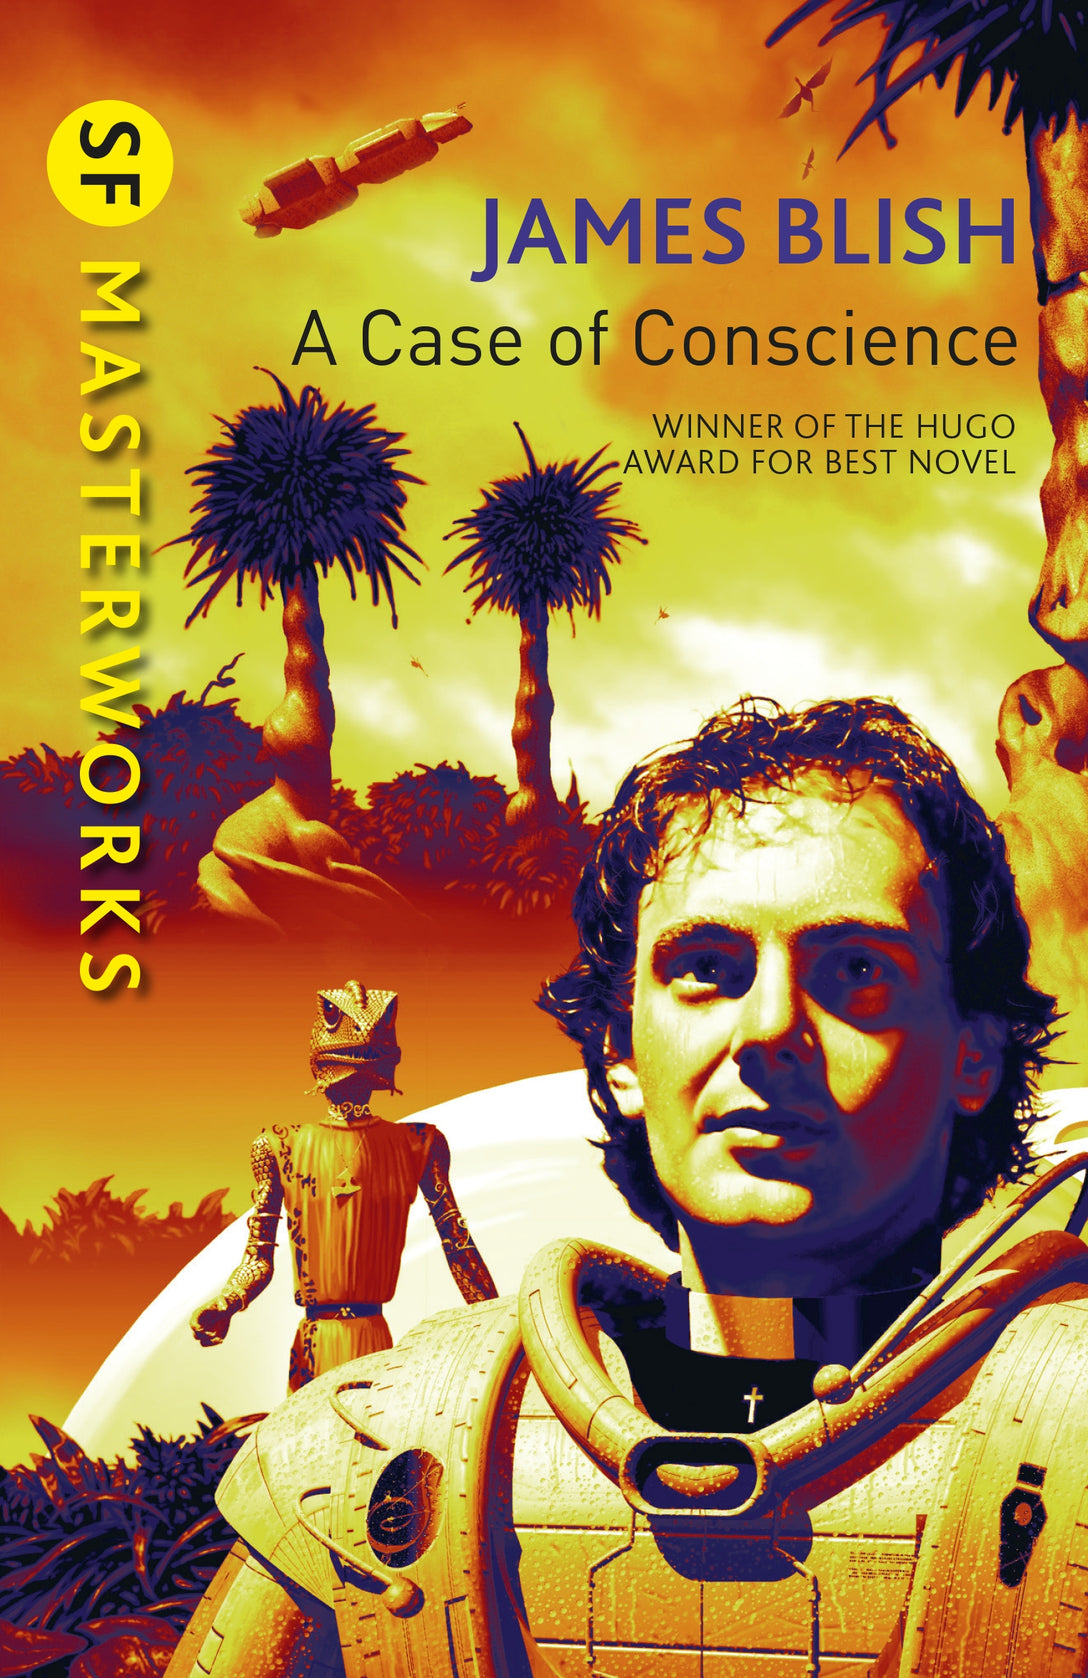 A Case Of Conscience by James Blish